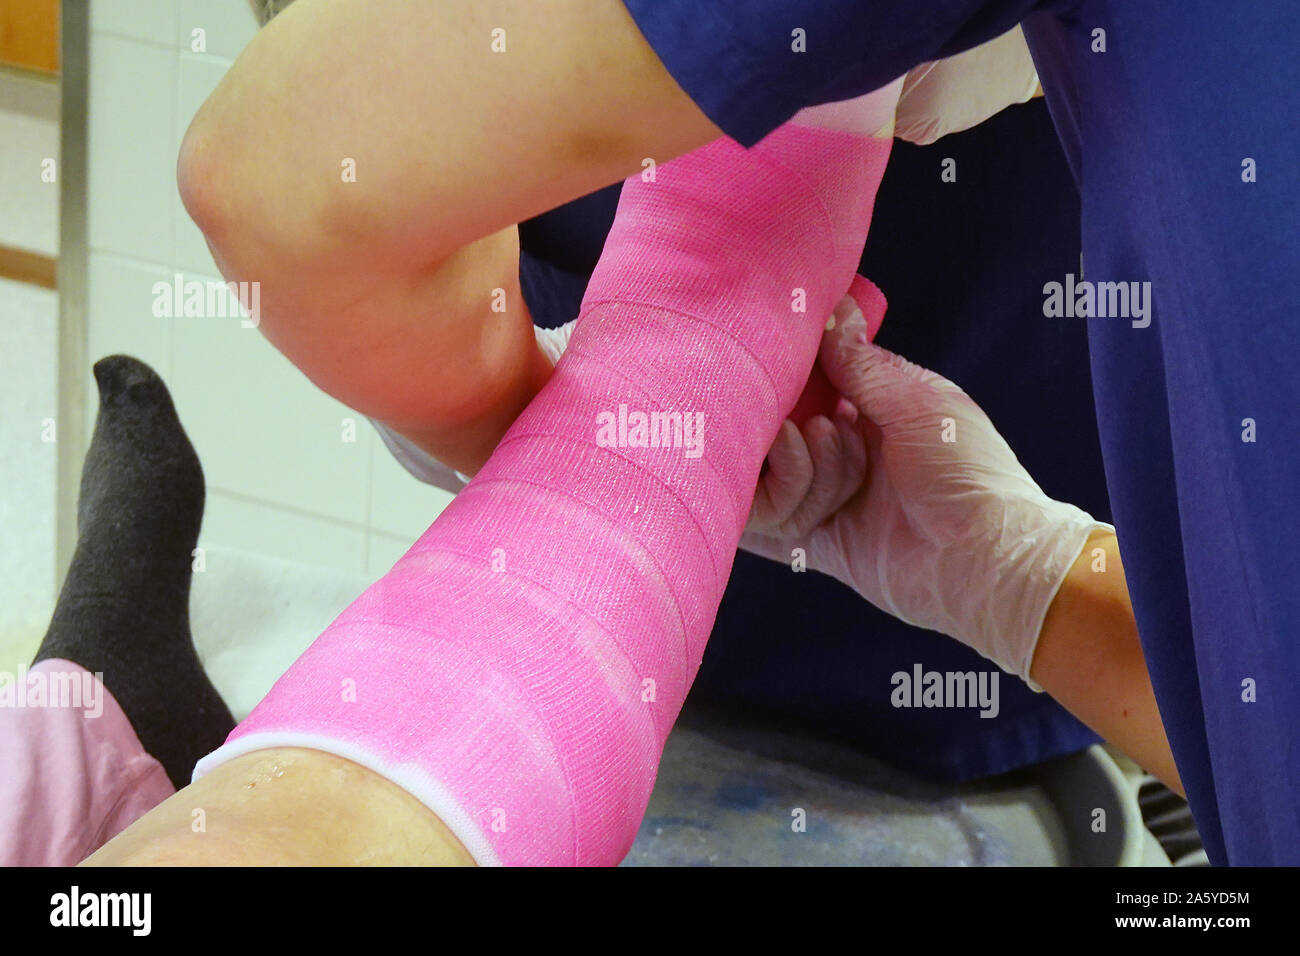 Orthopedic cast. Doctor plastering fractured ankle of patient using pink fibreglass top layer. Stock Photo